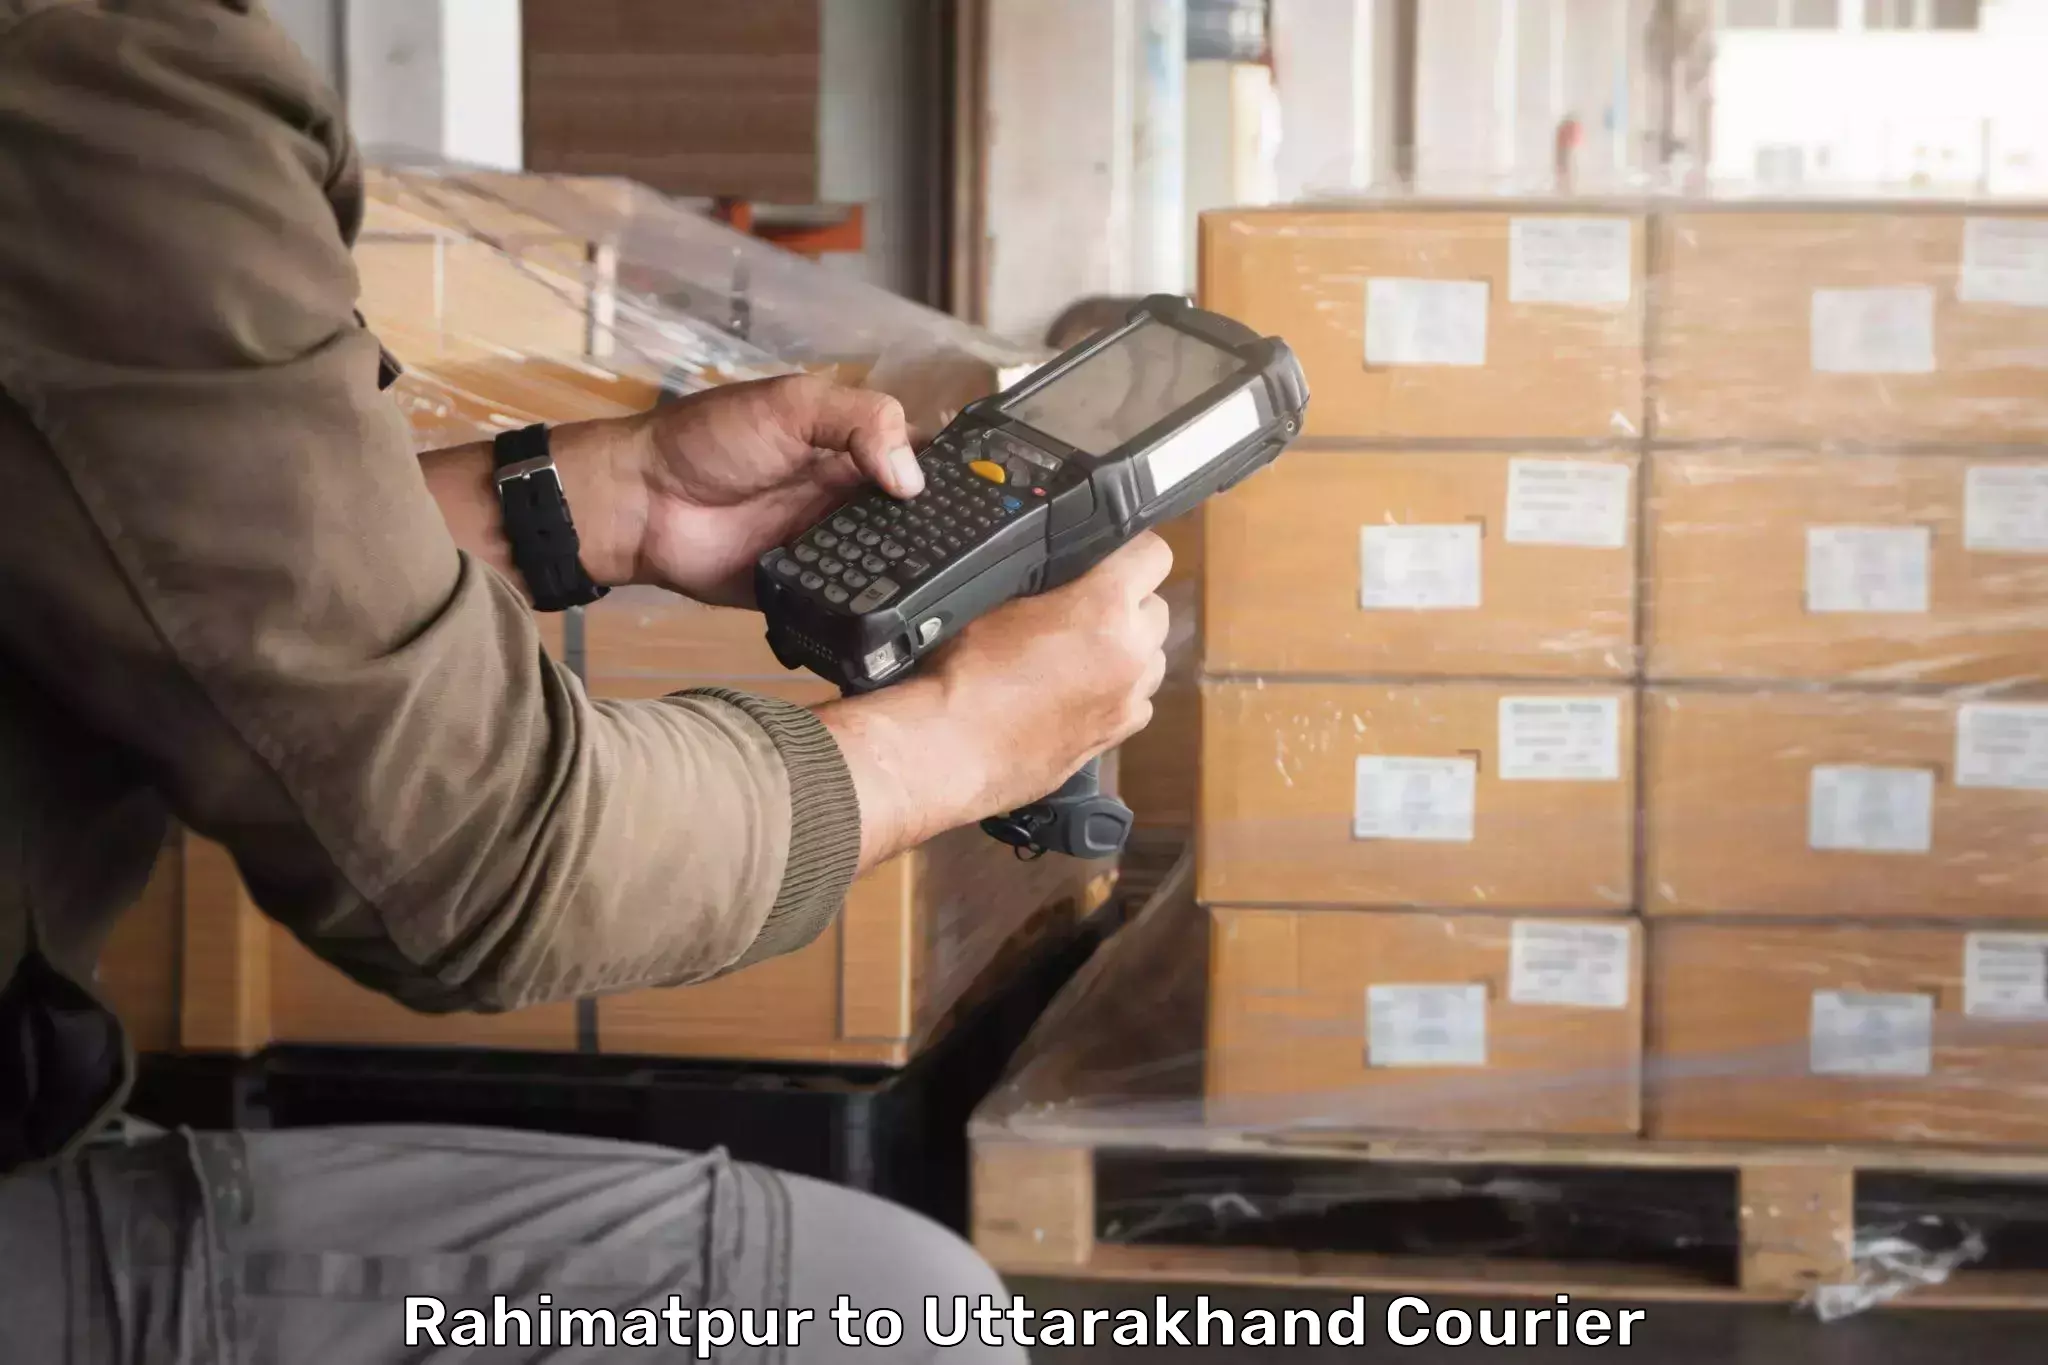 Dynamic courier operations Rahimatpur to Tehri Garhwal